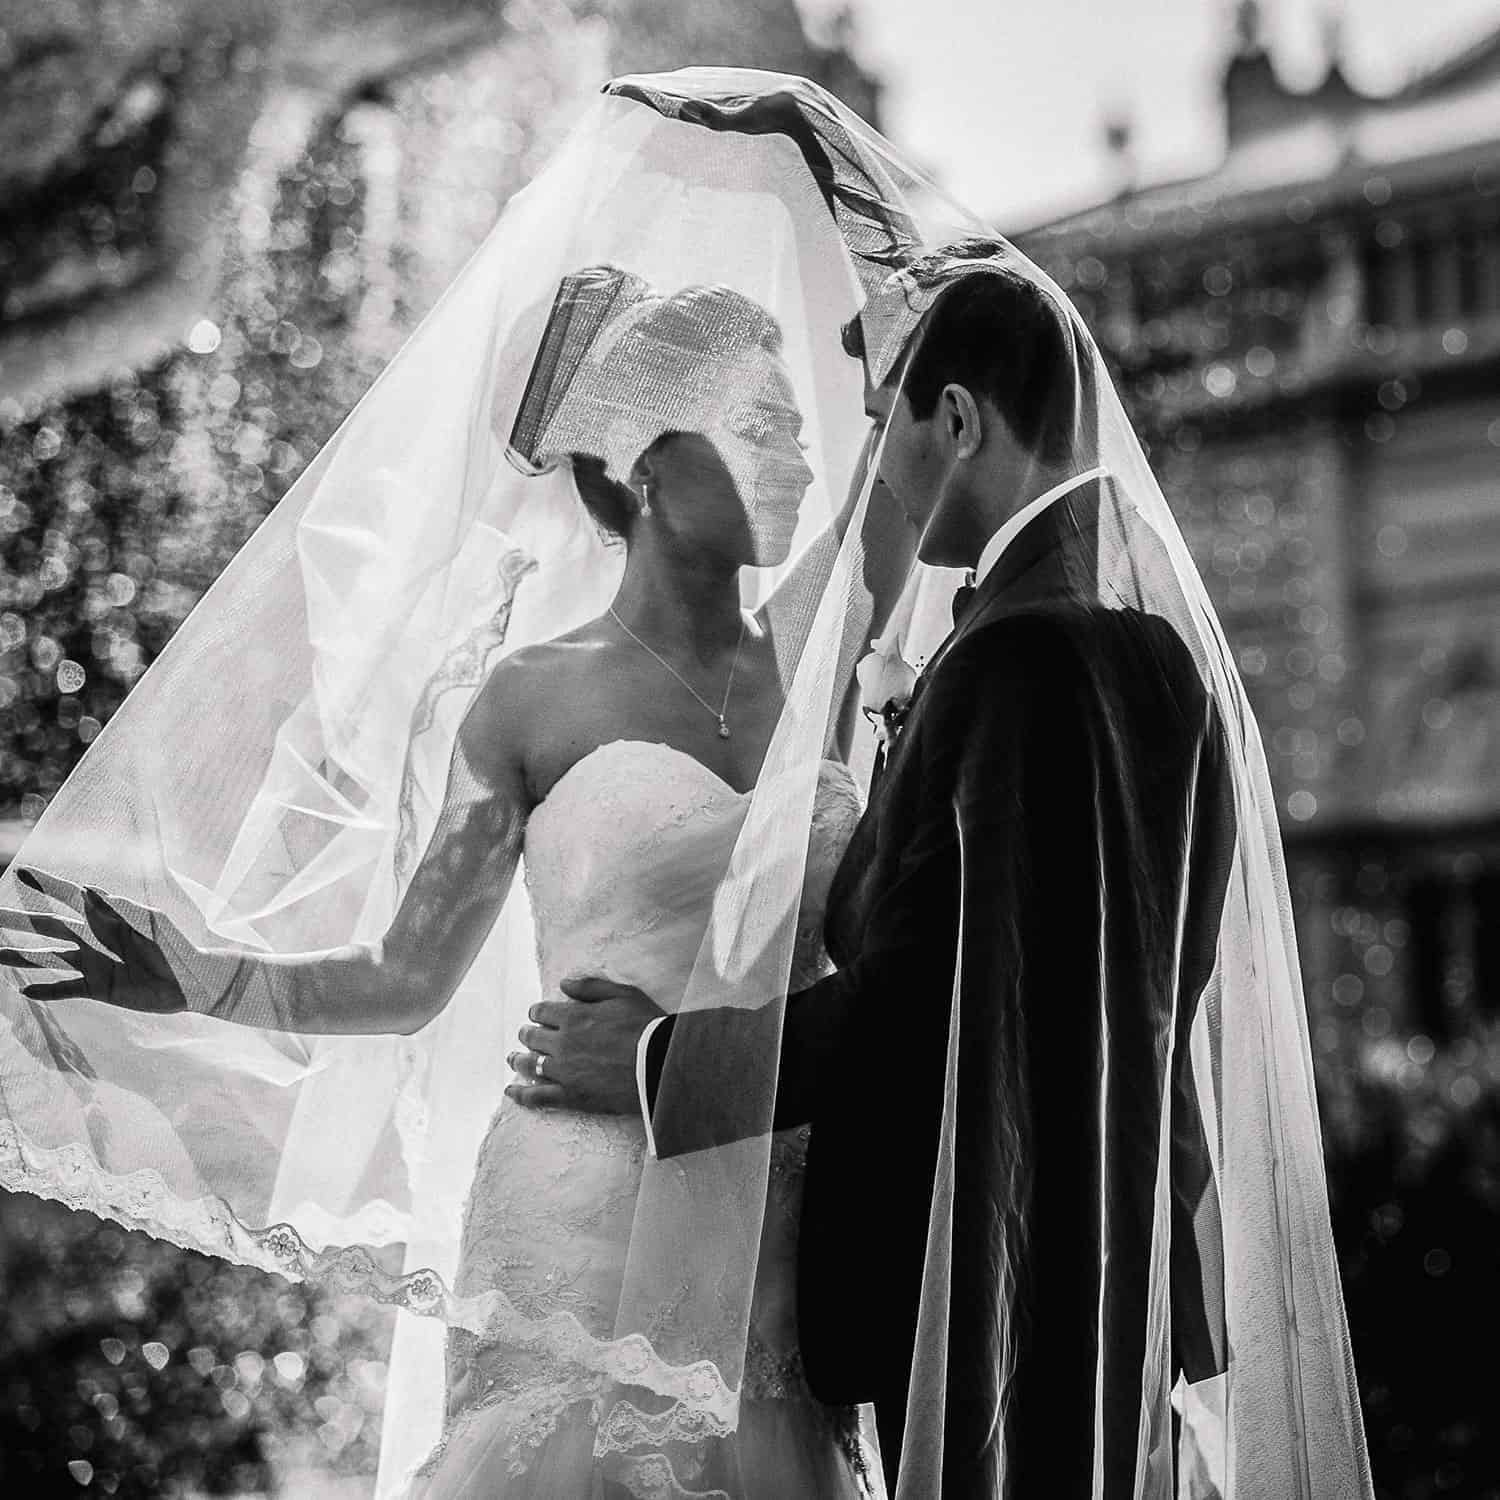 Bride and groom under veil in black and white